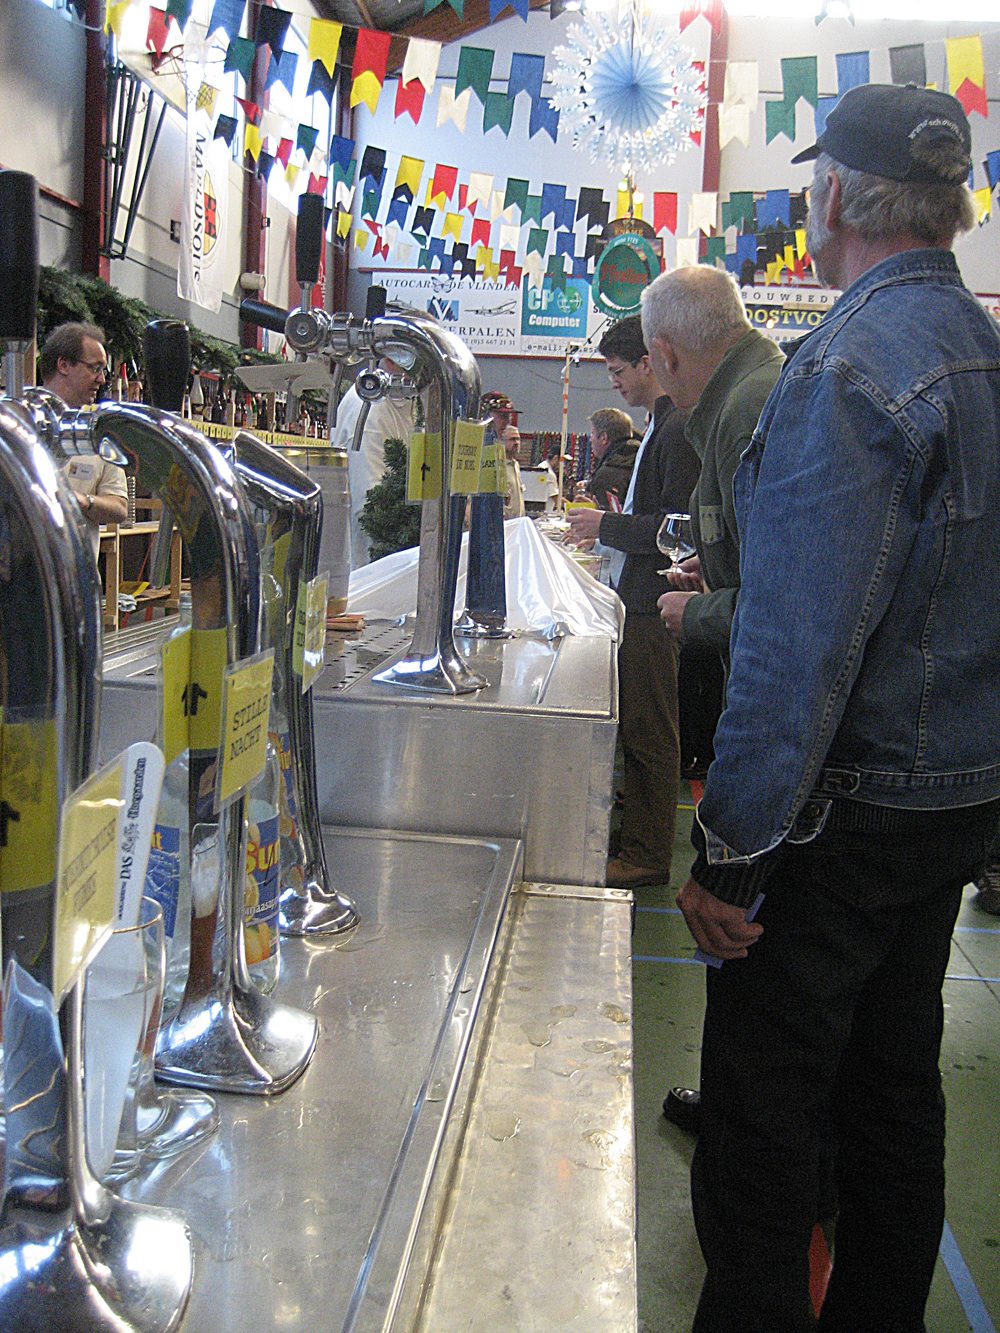 Thirsty patrons line up for beer at Kerstbierfestival in Essen - Photo courtesy William Roelens.